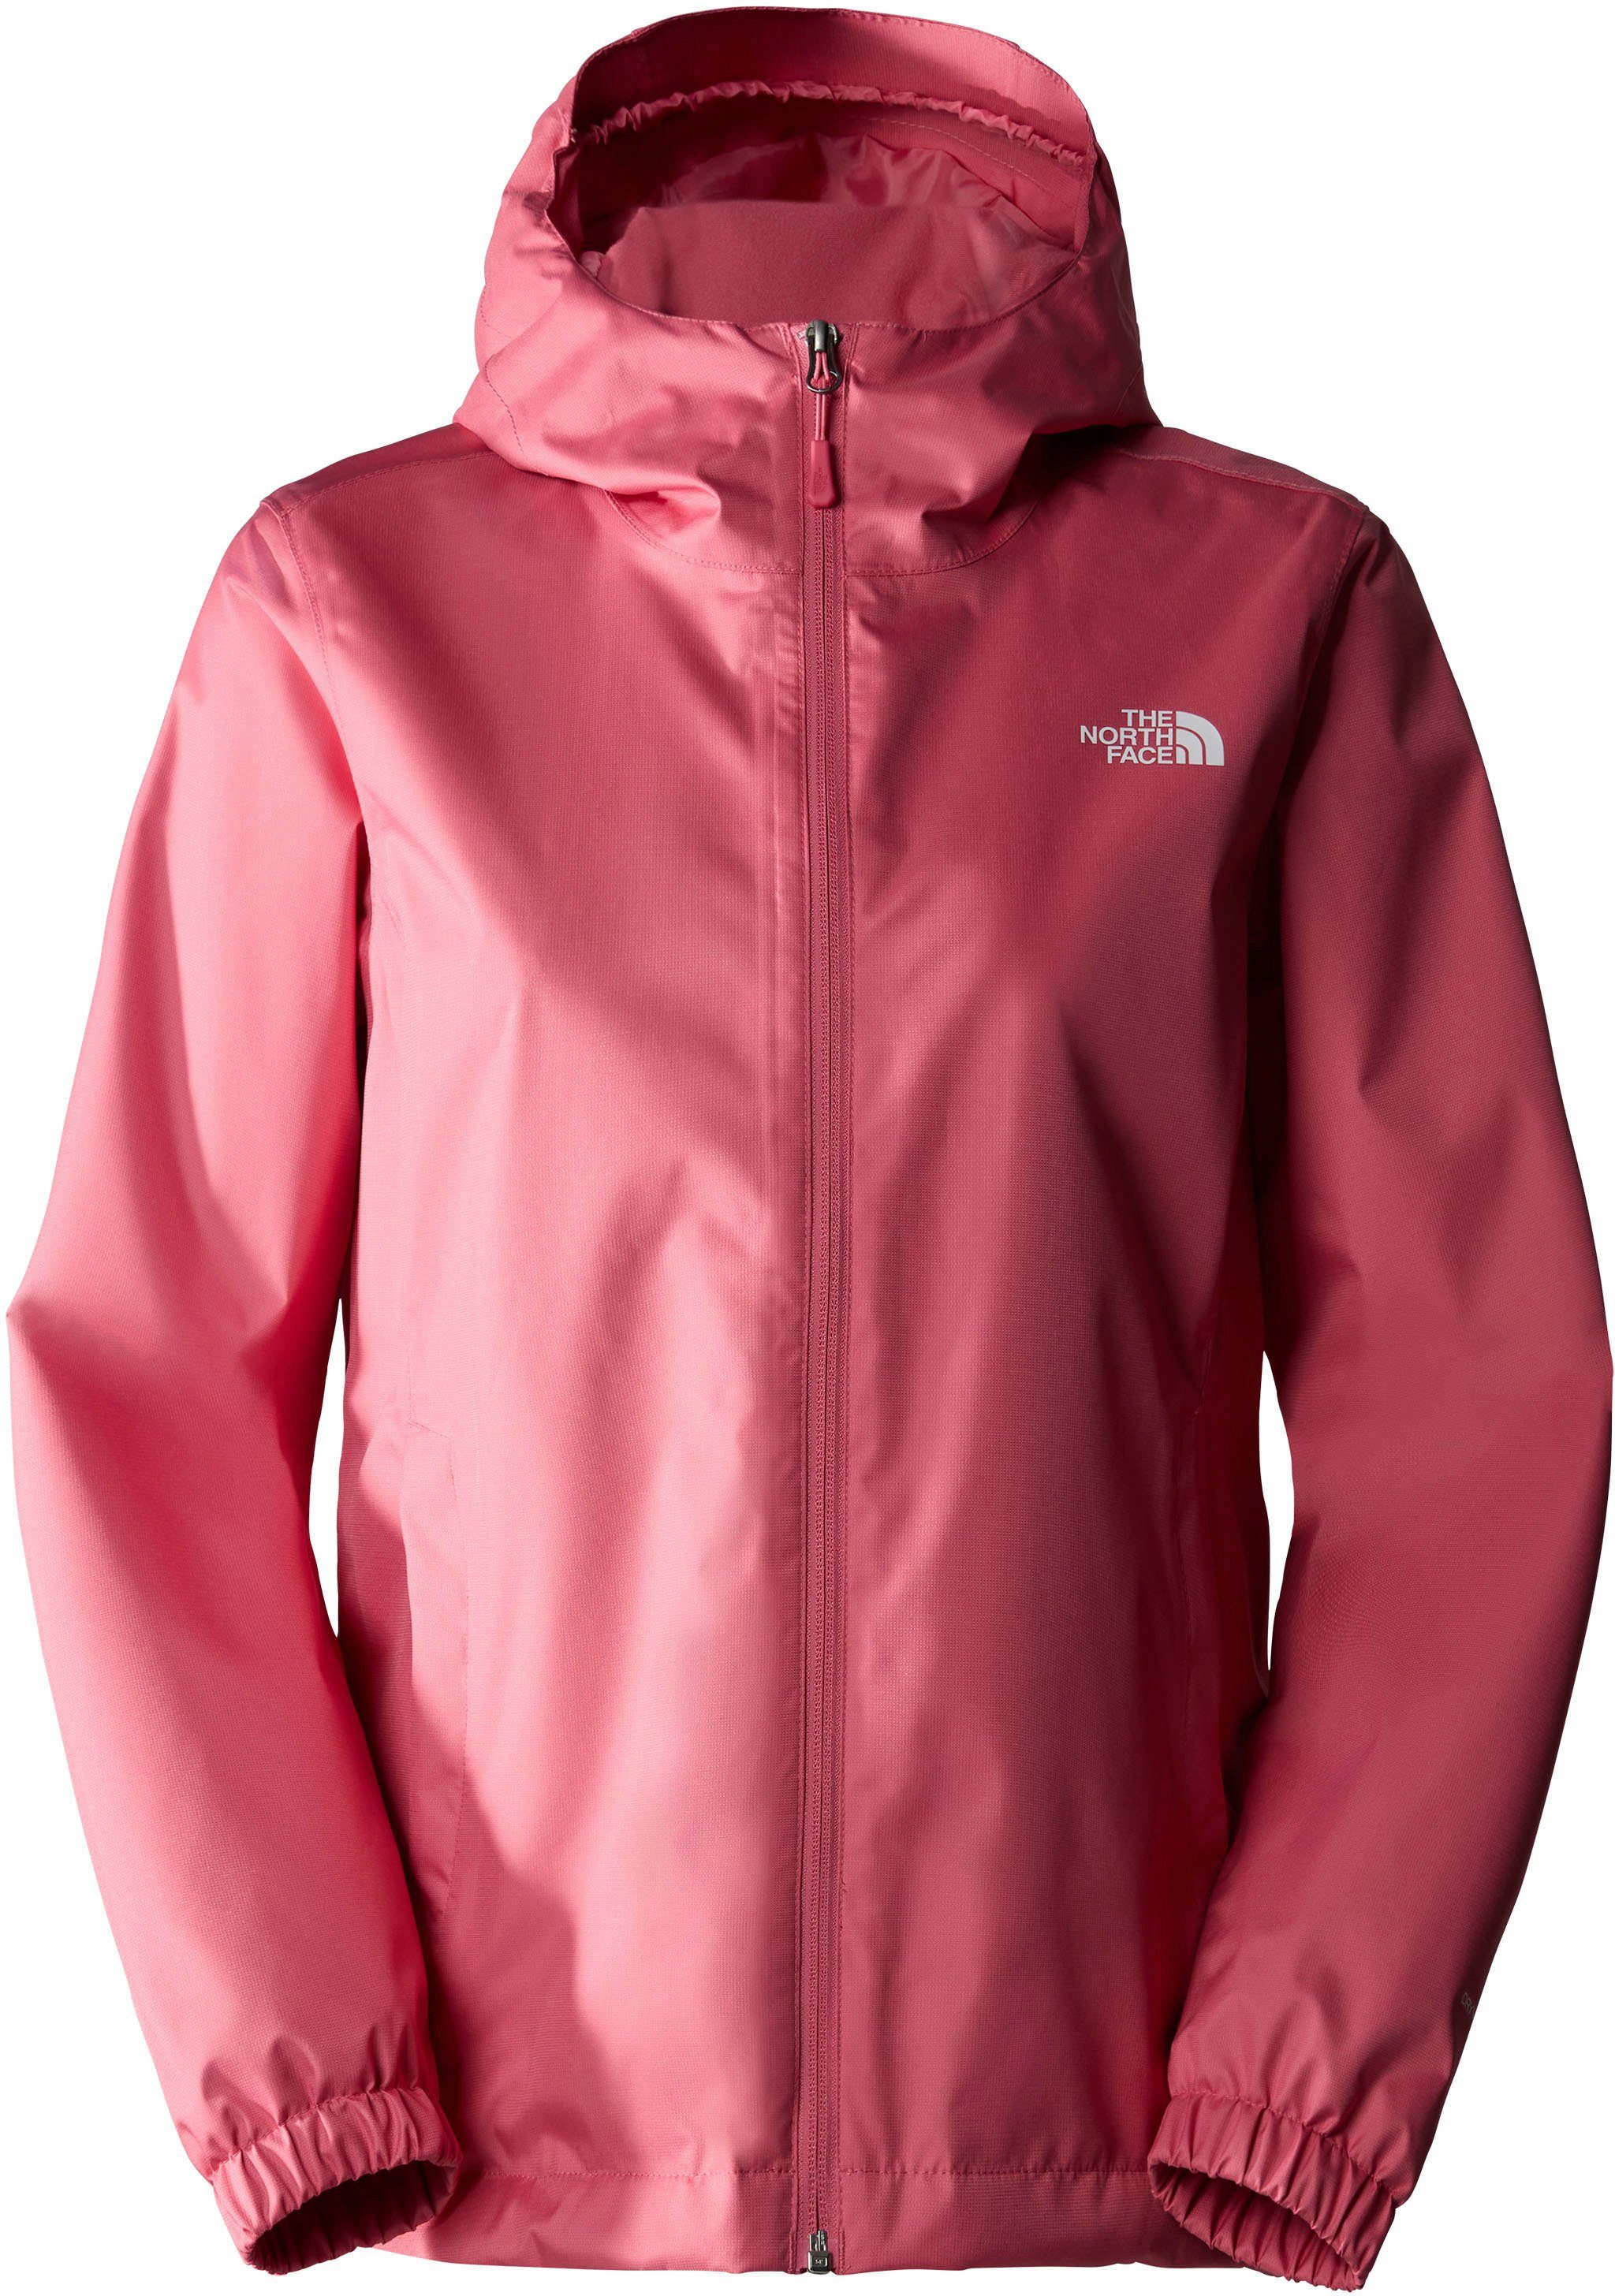 The North Face - Logostickerei cosmo mit JACKET W Funktionsjacke (1-St) QUEST pink EU